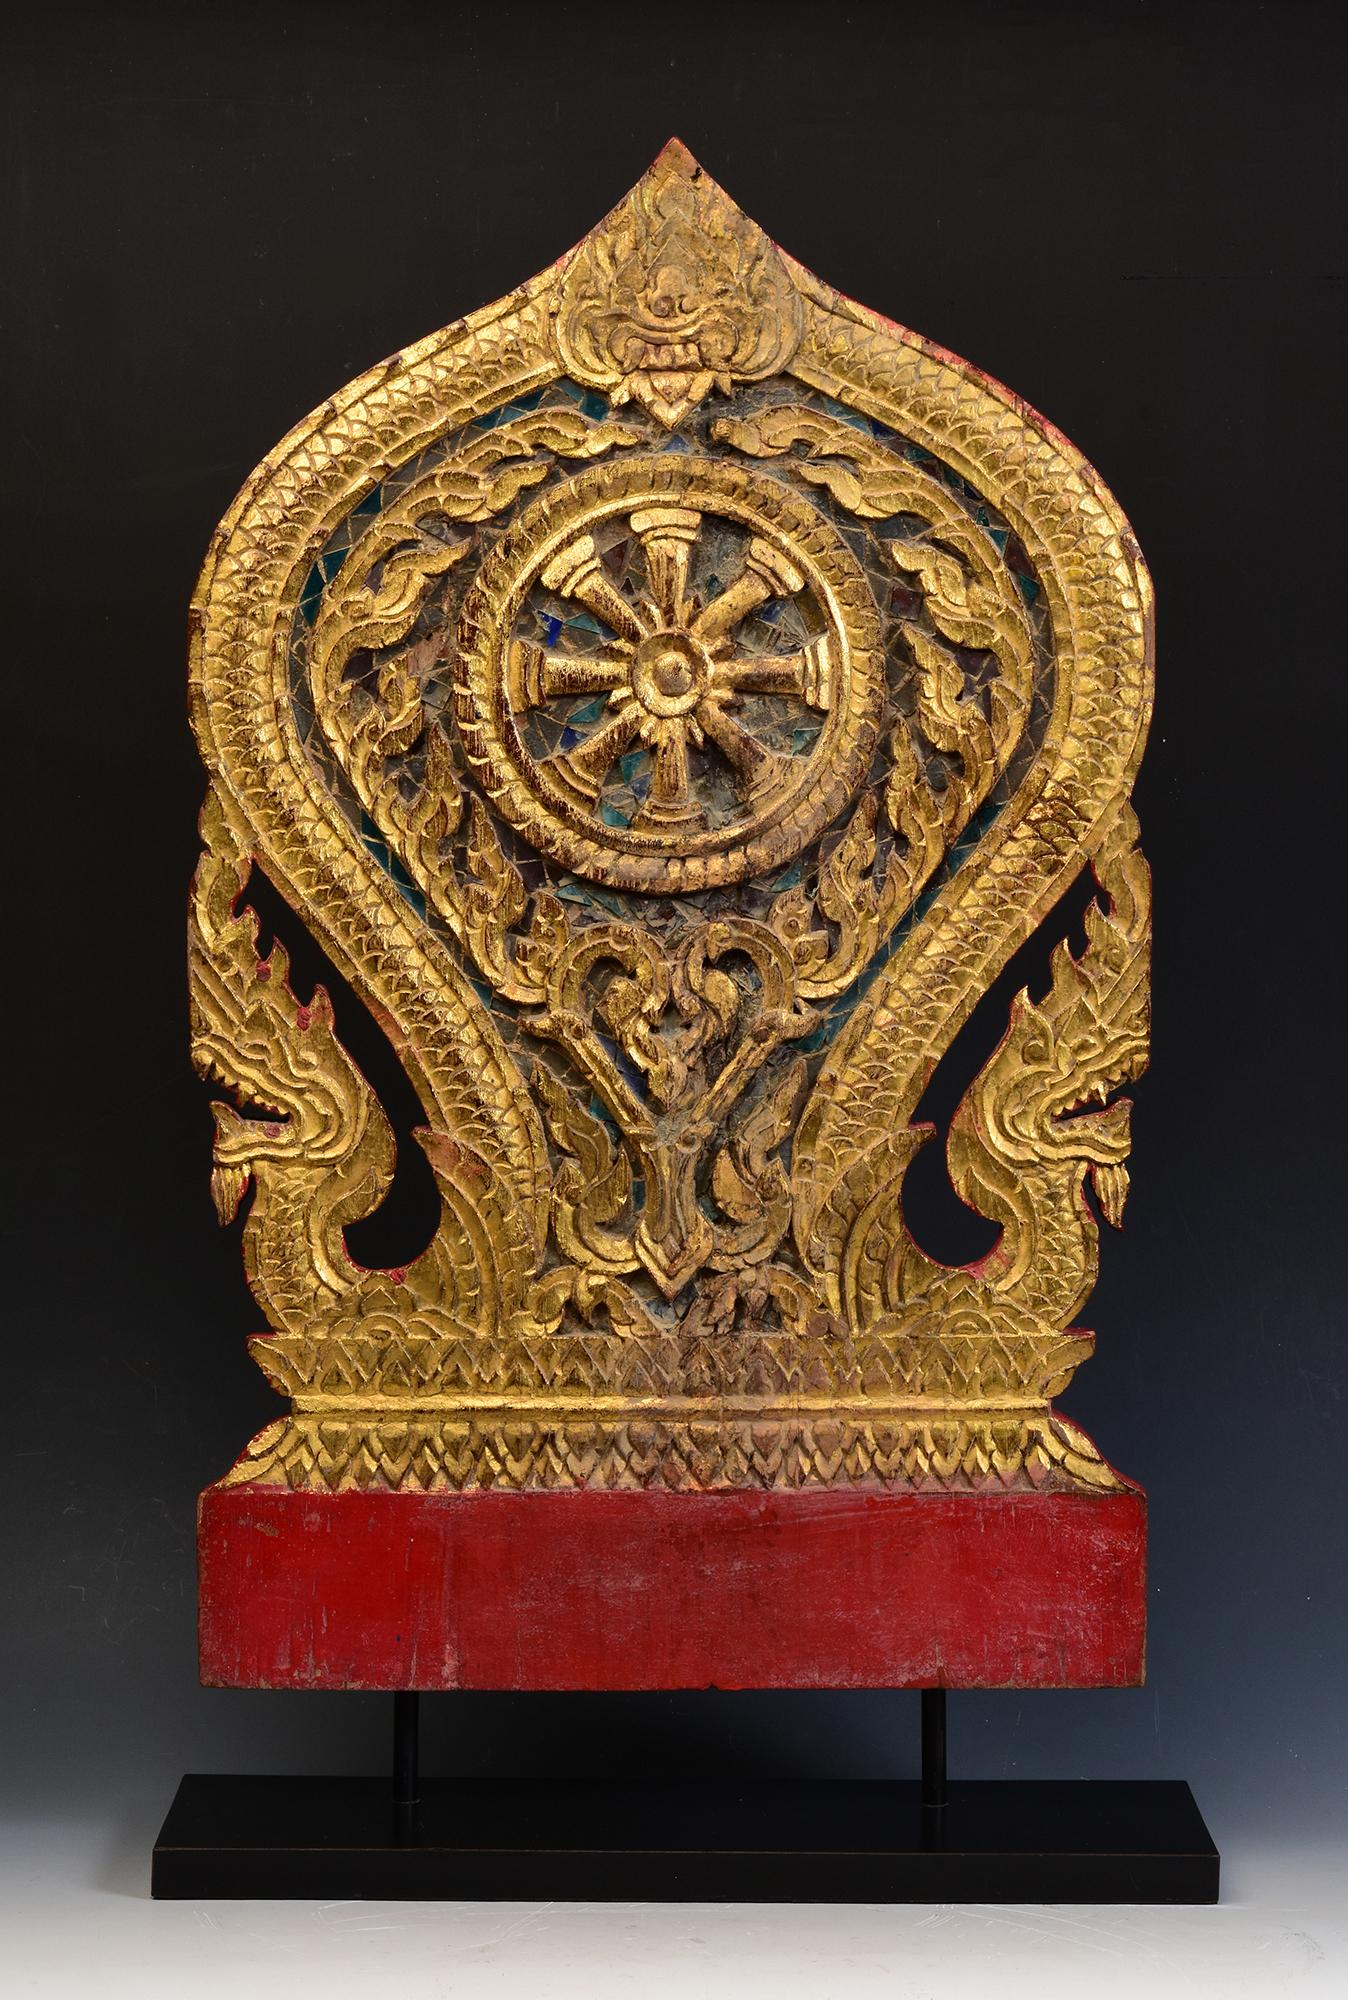 Thai wood carving, carved as Naga under leaf-shape, painted with lacquer and golden color, decorated with mirror-tiles, used for temple decoration.

The middle is carved as Dharmacakra surrounded by flowers and leaves. Dharmacakra (eight-sided